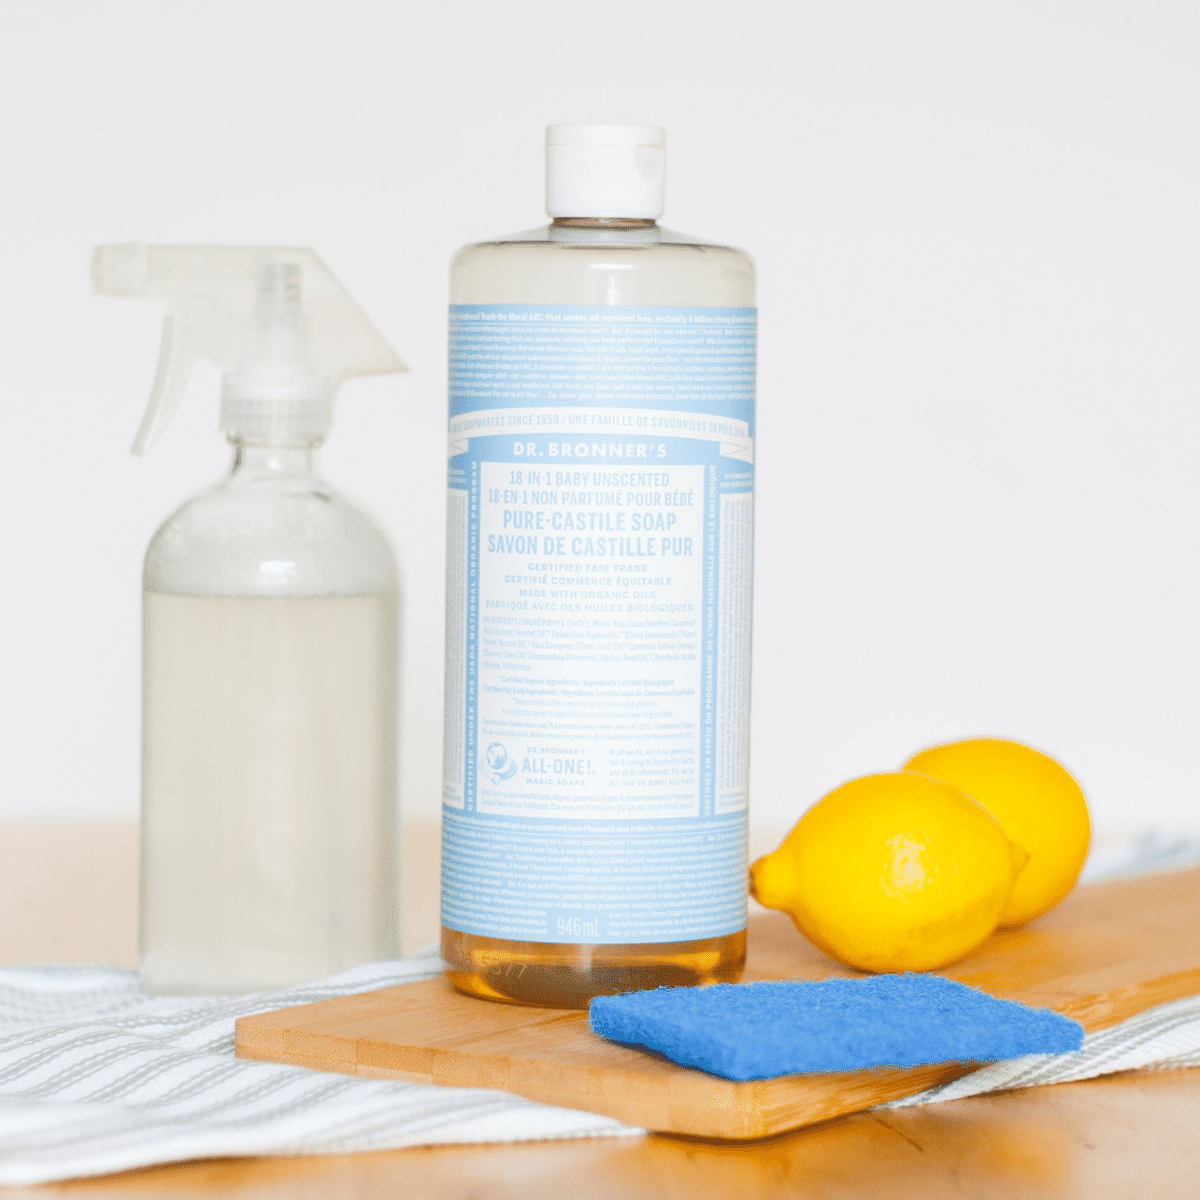 castile soap and cleaning supplies